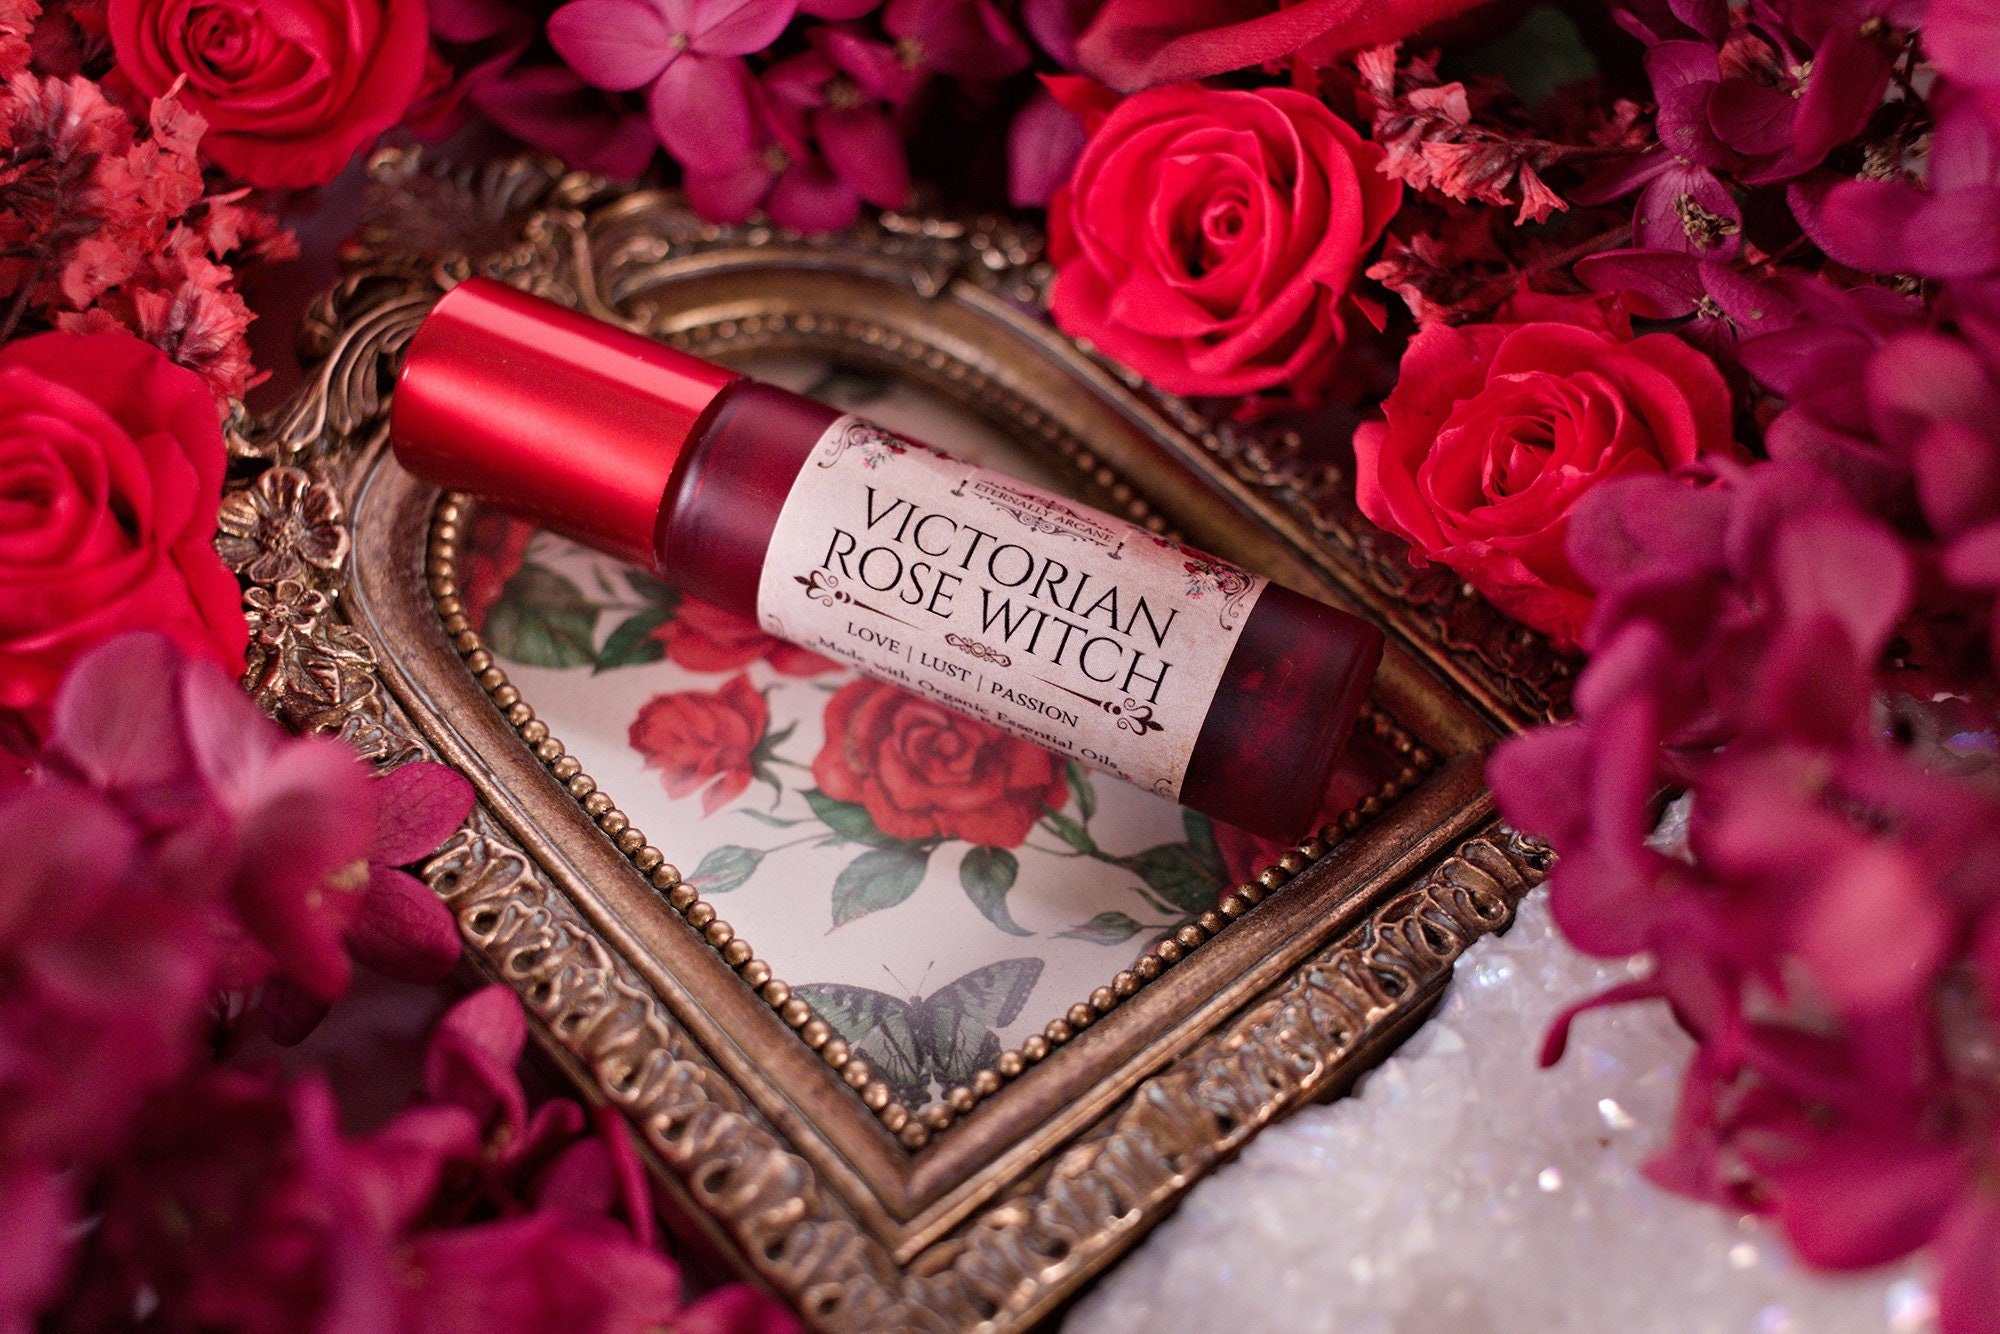 Victorian Rose Witch™ Love & Lust Rose Perfume Ritual Oil